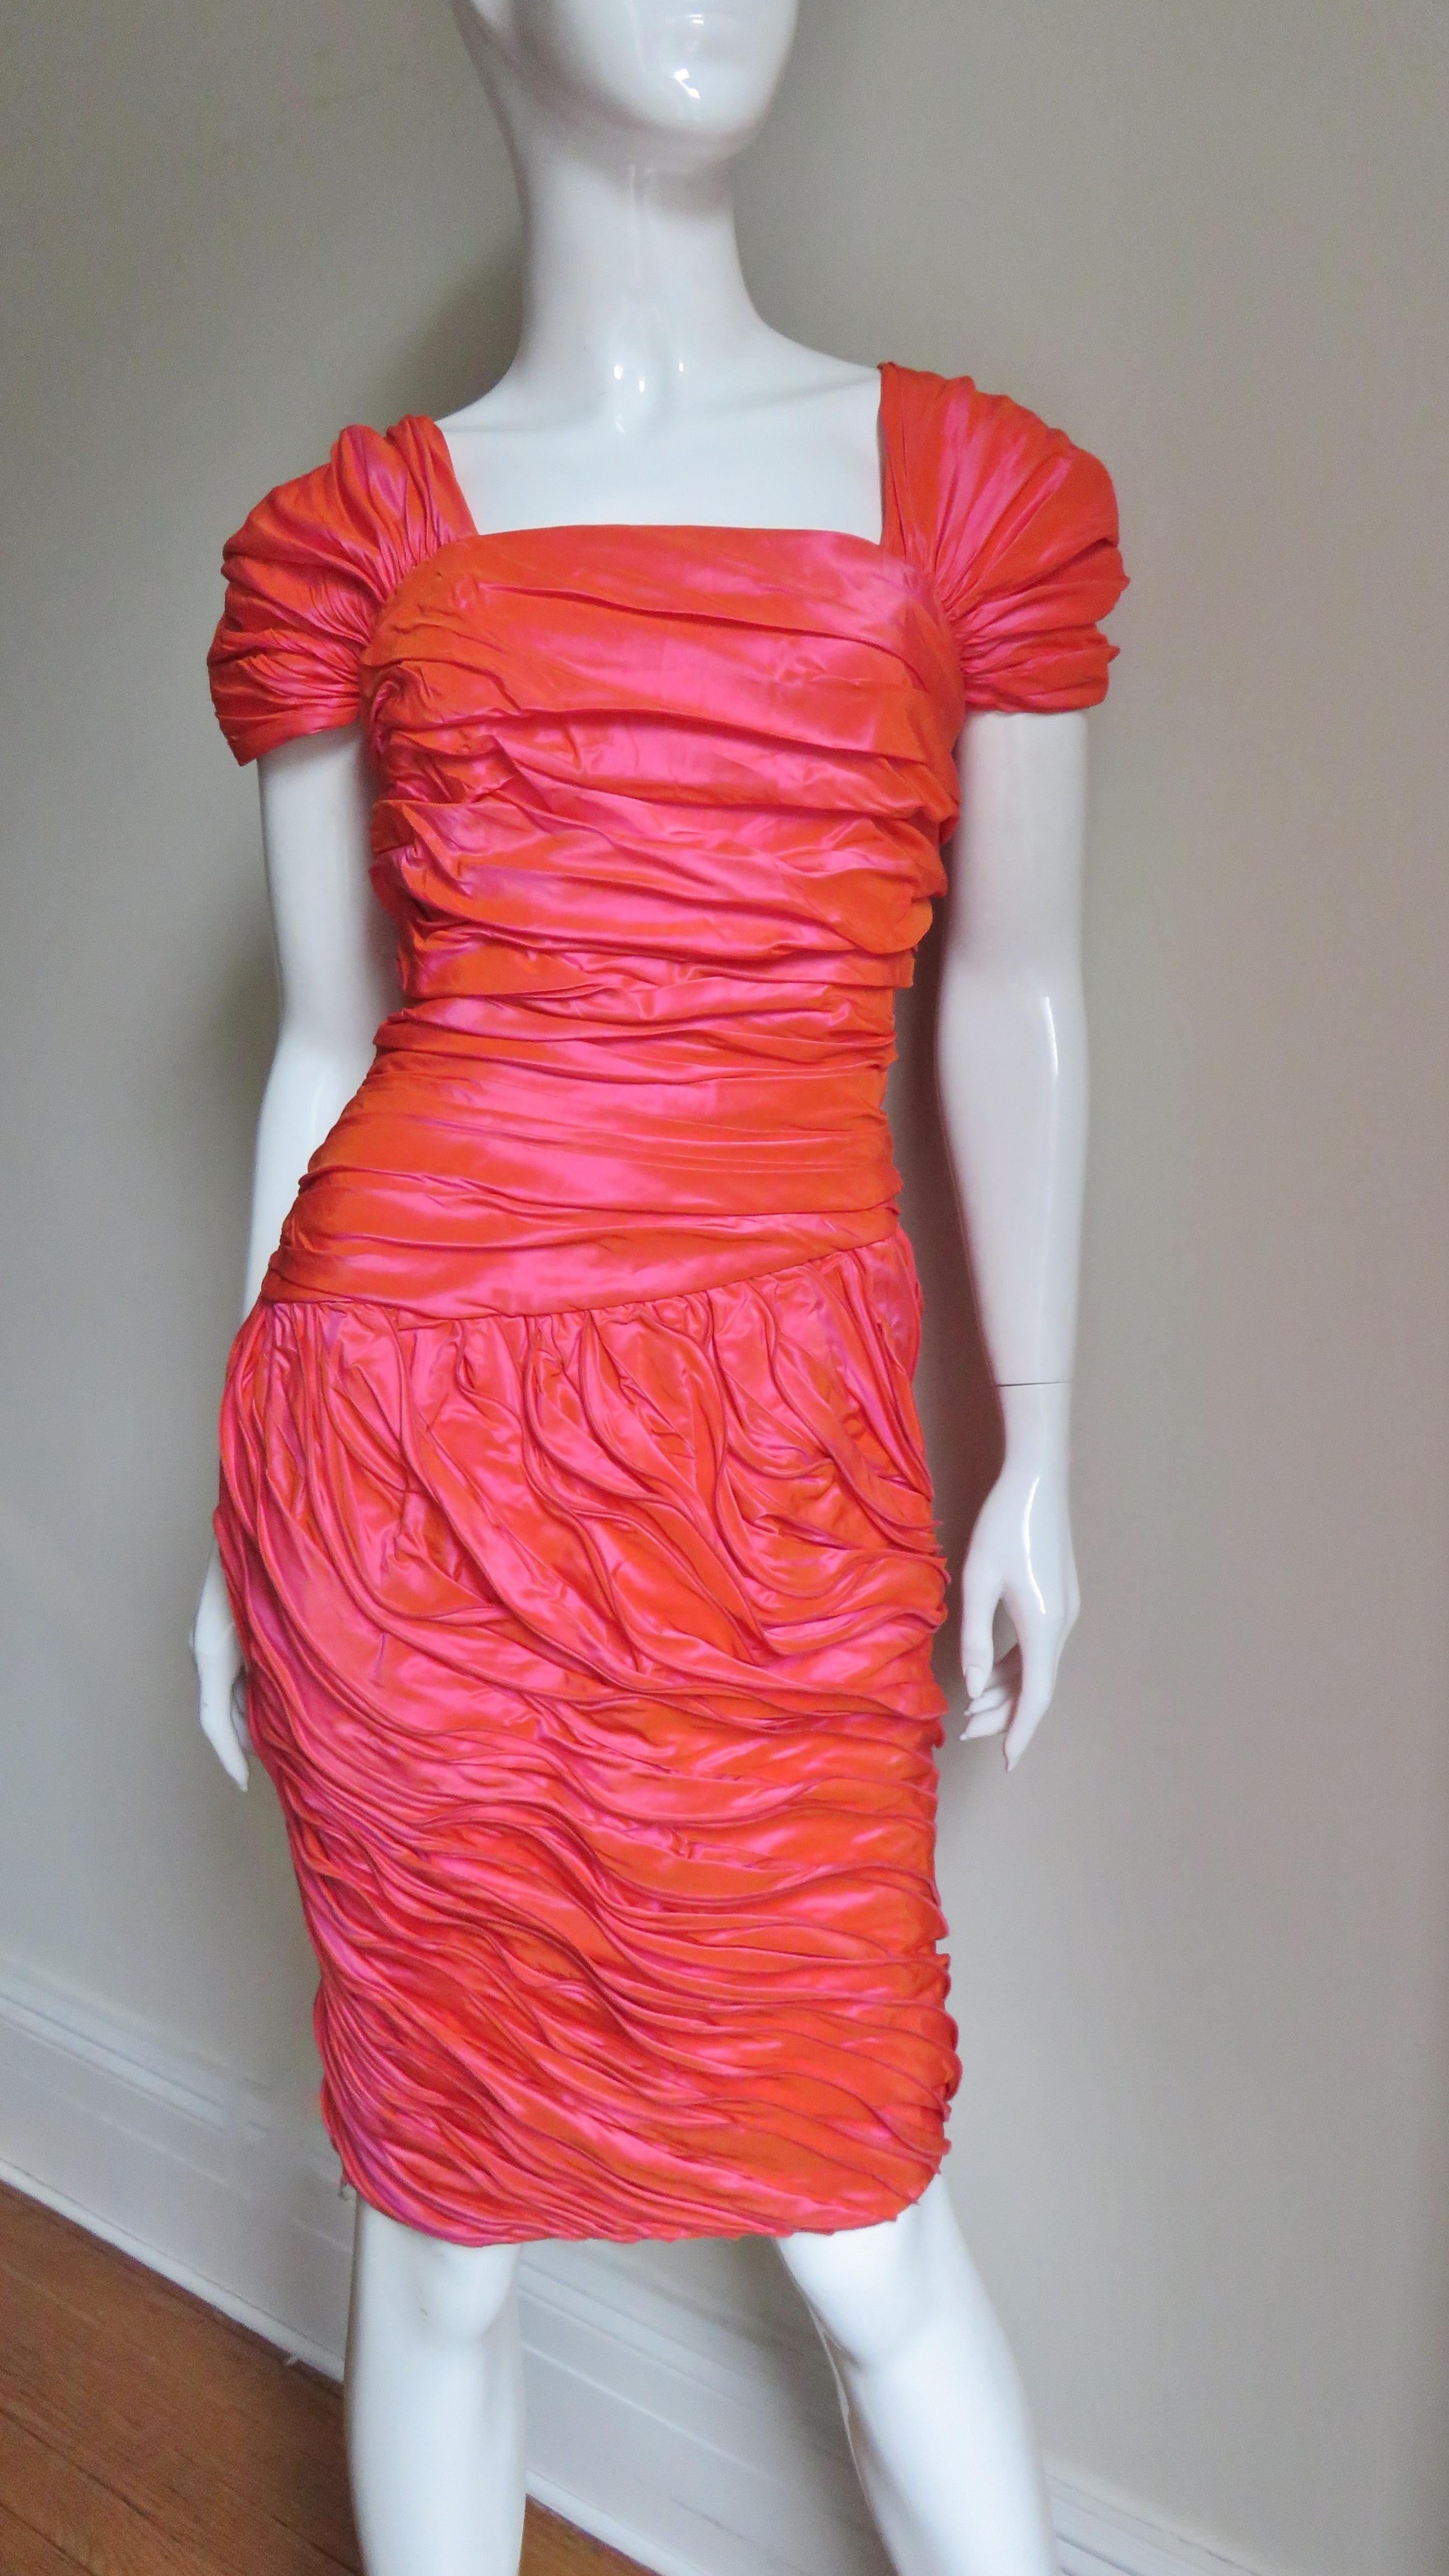 A gorgeous coral silk dress from Louis Feraud.  The silk has a slight iridescent quality alternating subtly between shades of coral and rose coral. The dress has gathered cap sleeves over the shoulders and ruching across the bodice front and back.